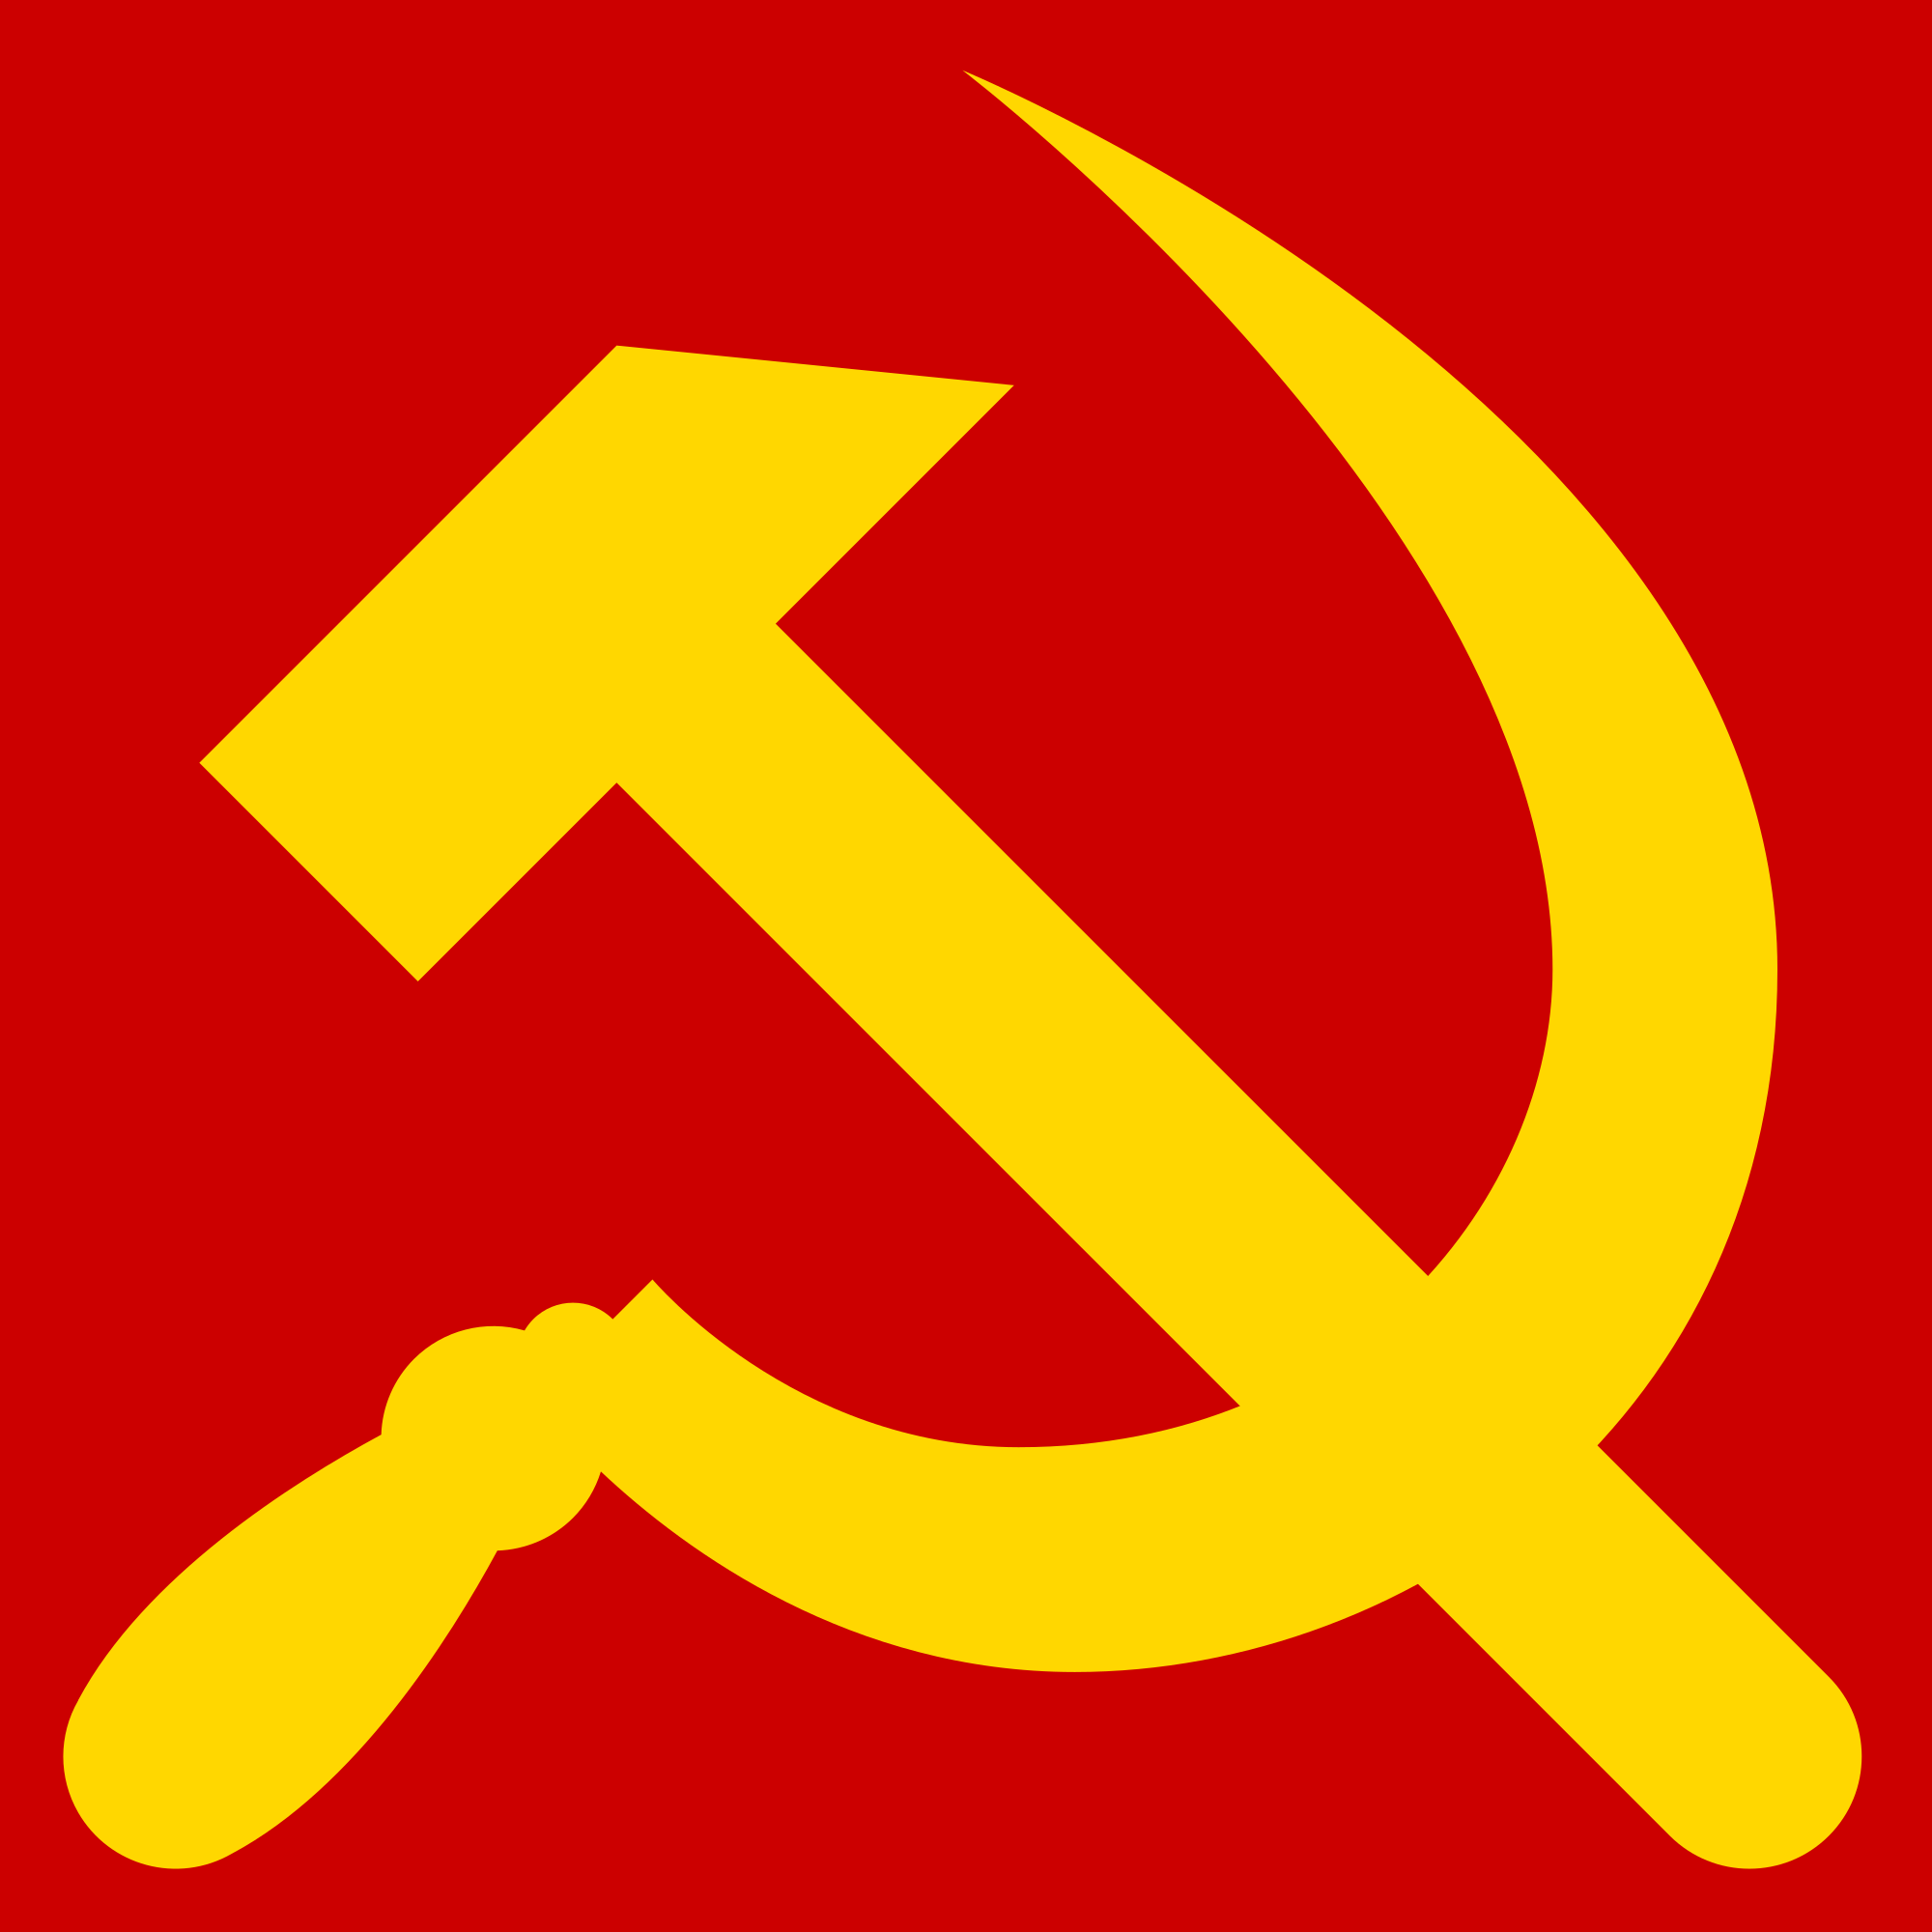 the-flag-of-the-soviet-union-i-like-it-despite-what-it-stood-stands